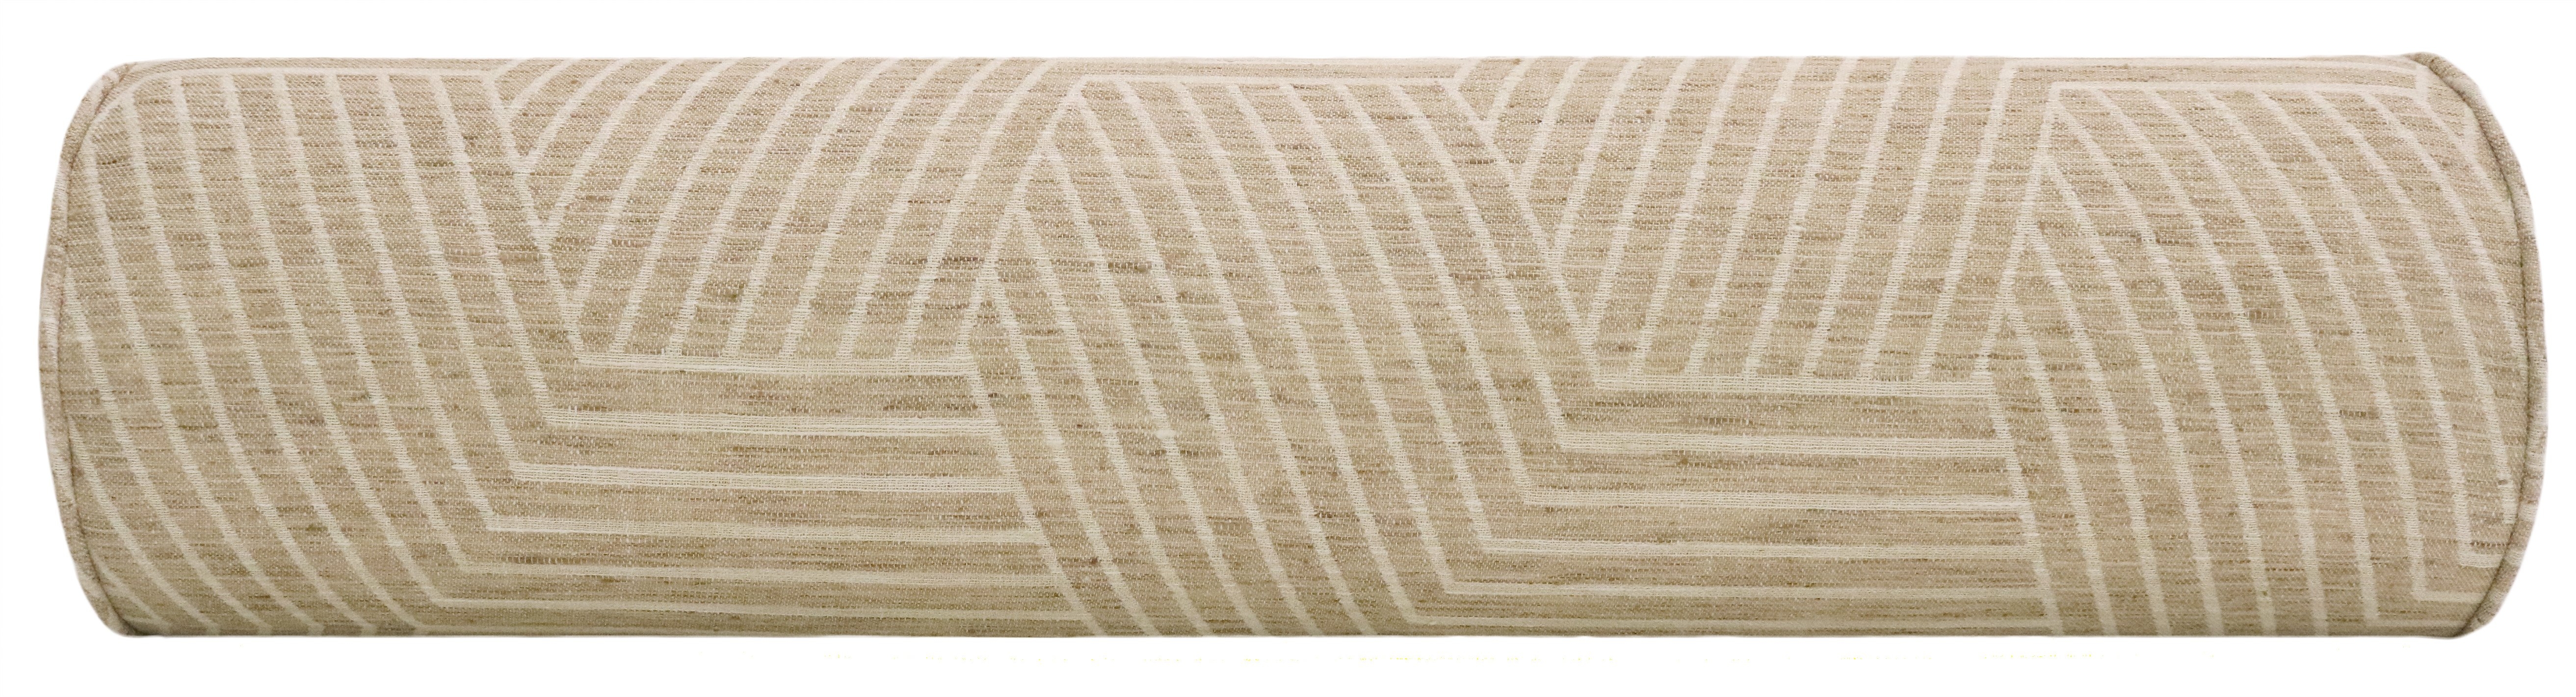 THE BOLSTER :: LABYRINTH LINEN // NATURAL - QUEEN // 9" X 36" - Image 3